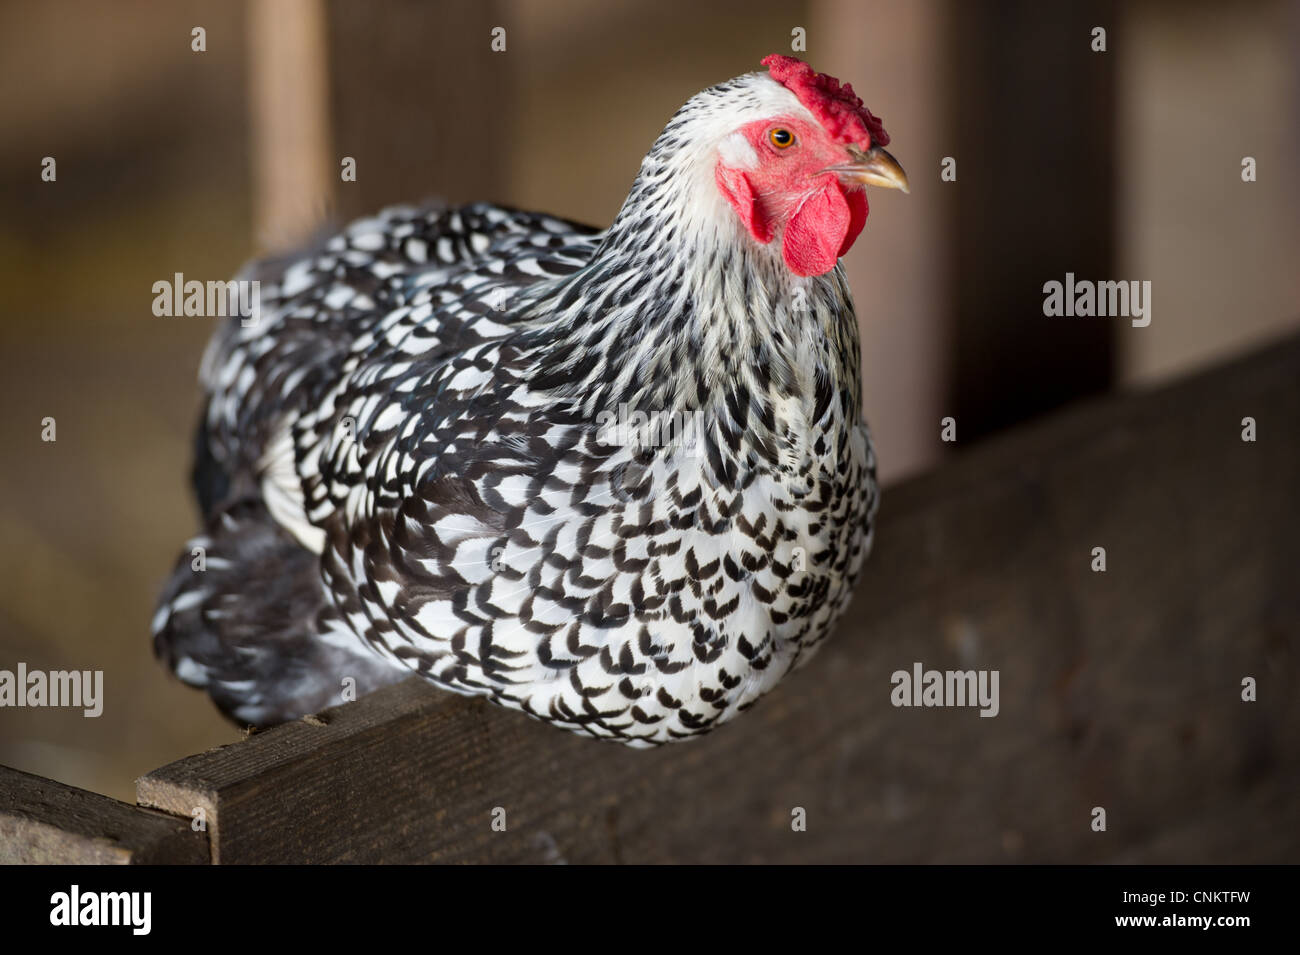 Hen perched on a wooden fence inside barn. Stock Photo